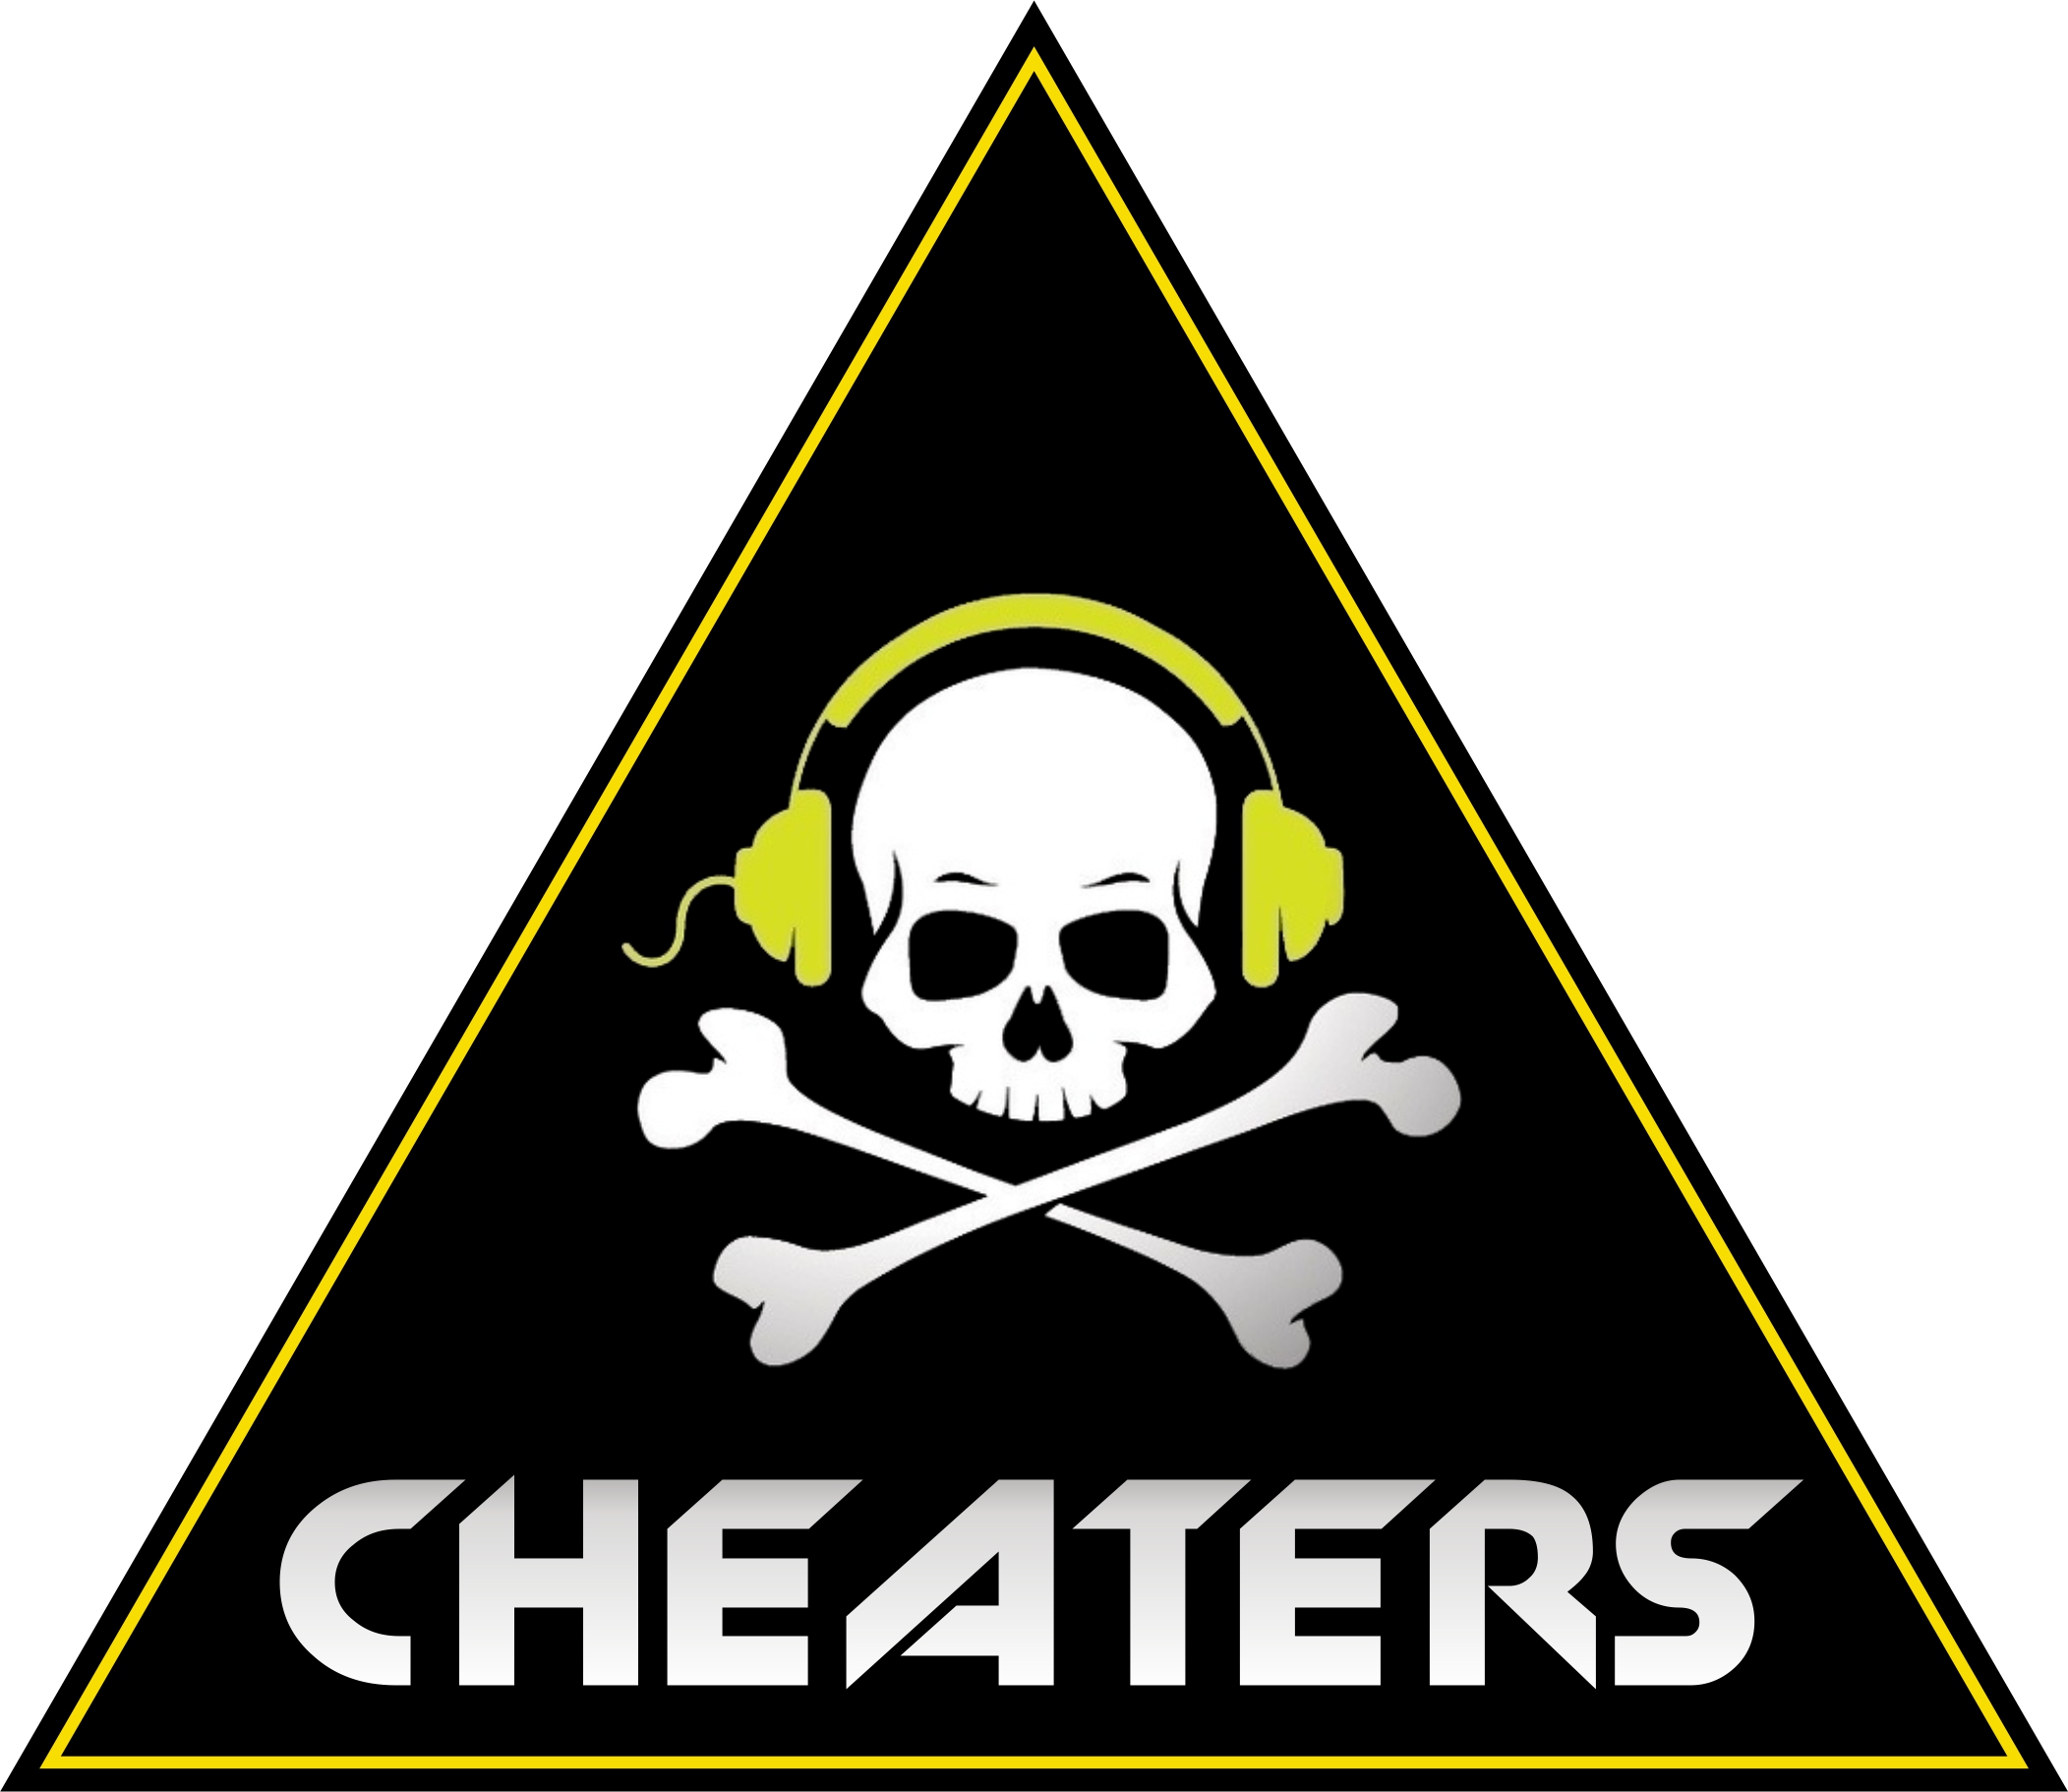 Steam not cheater фото 99